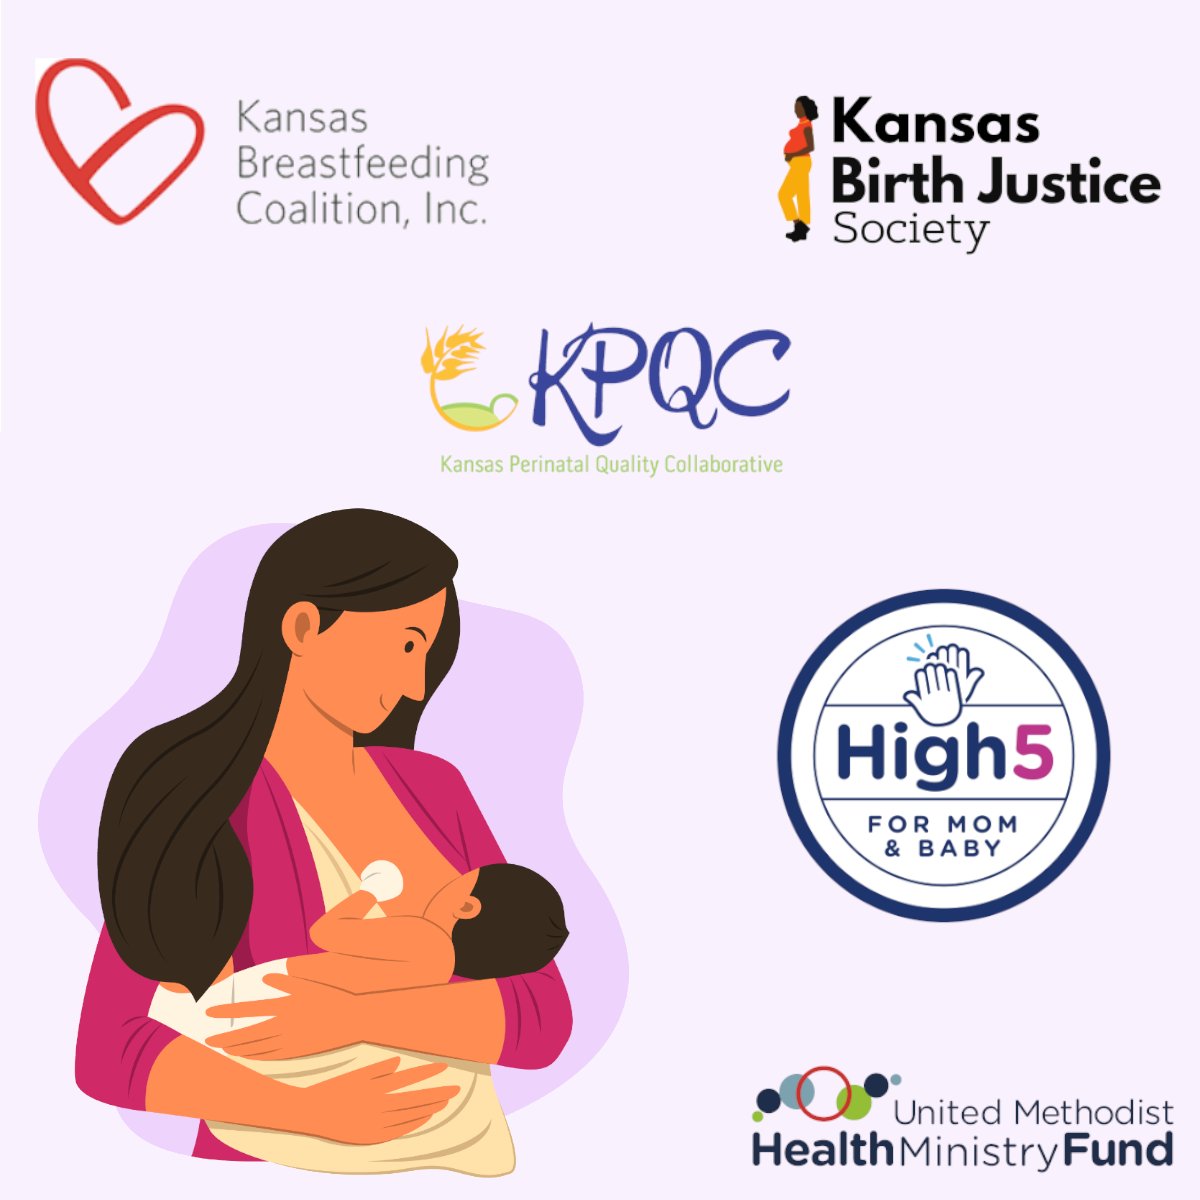 It’s National Breastfeeding Month and we are proud to work alongside many great partners and leaders in our state making improvements in the lives of families in Kansas. ksbreastfeeding.org, high5kansas.org, kansaspqc.org, ksbirthjustice.org